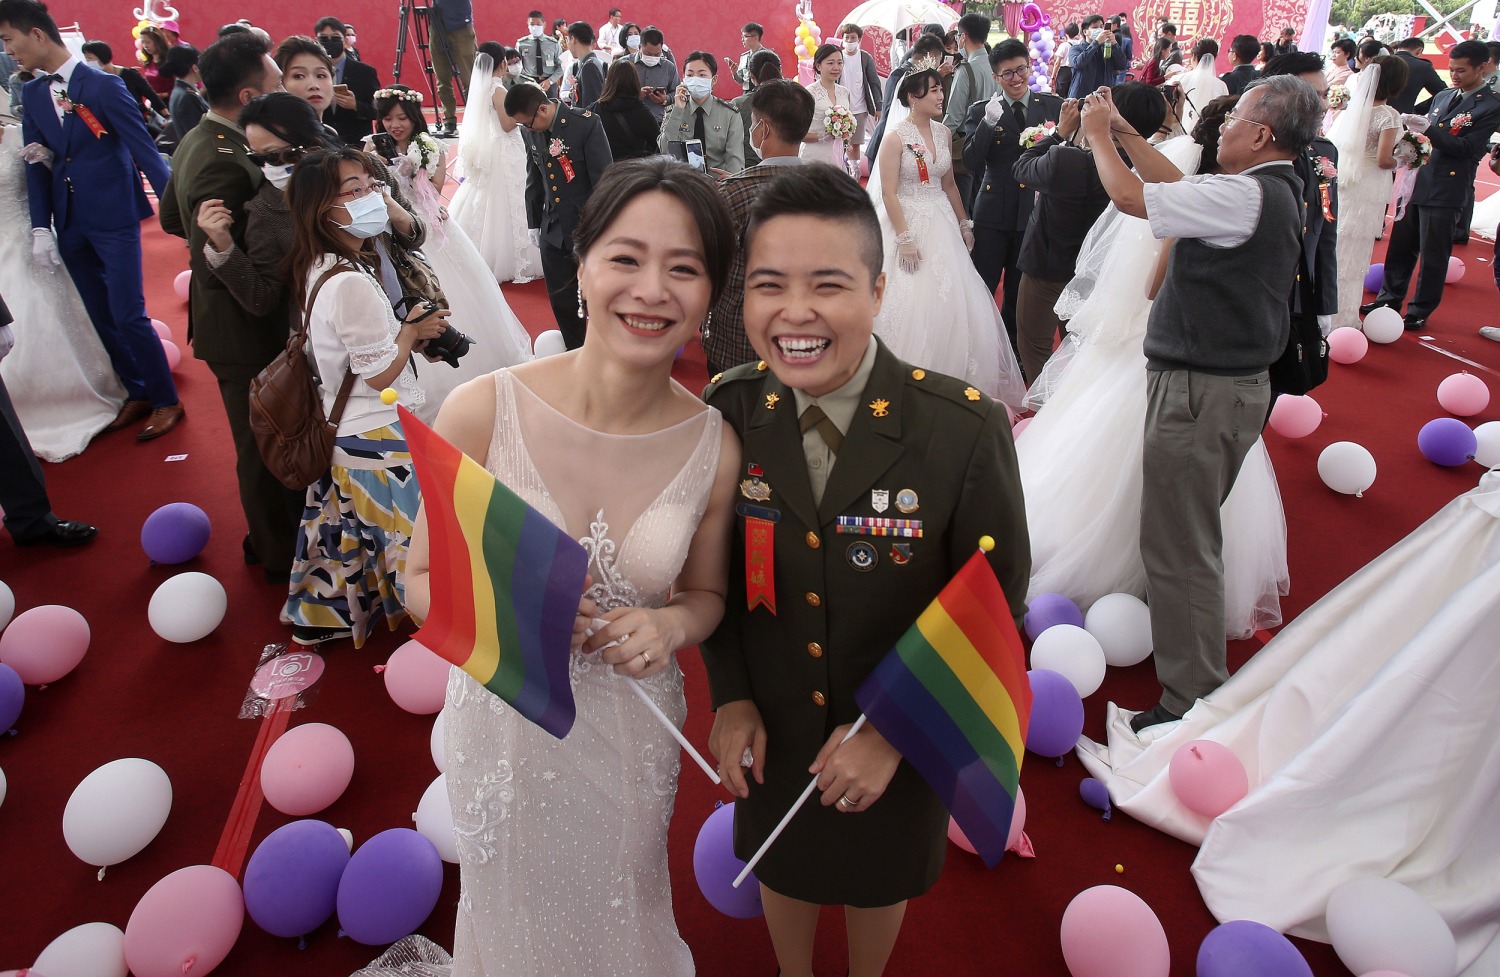 Two lesbian couples marry in mass wedding held by Taiwans military